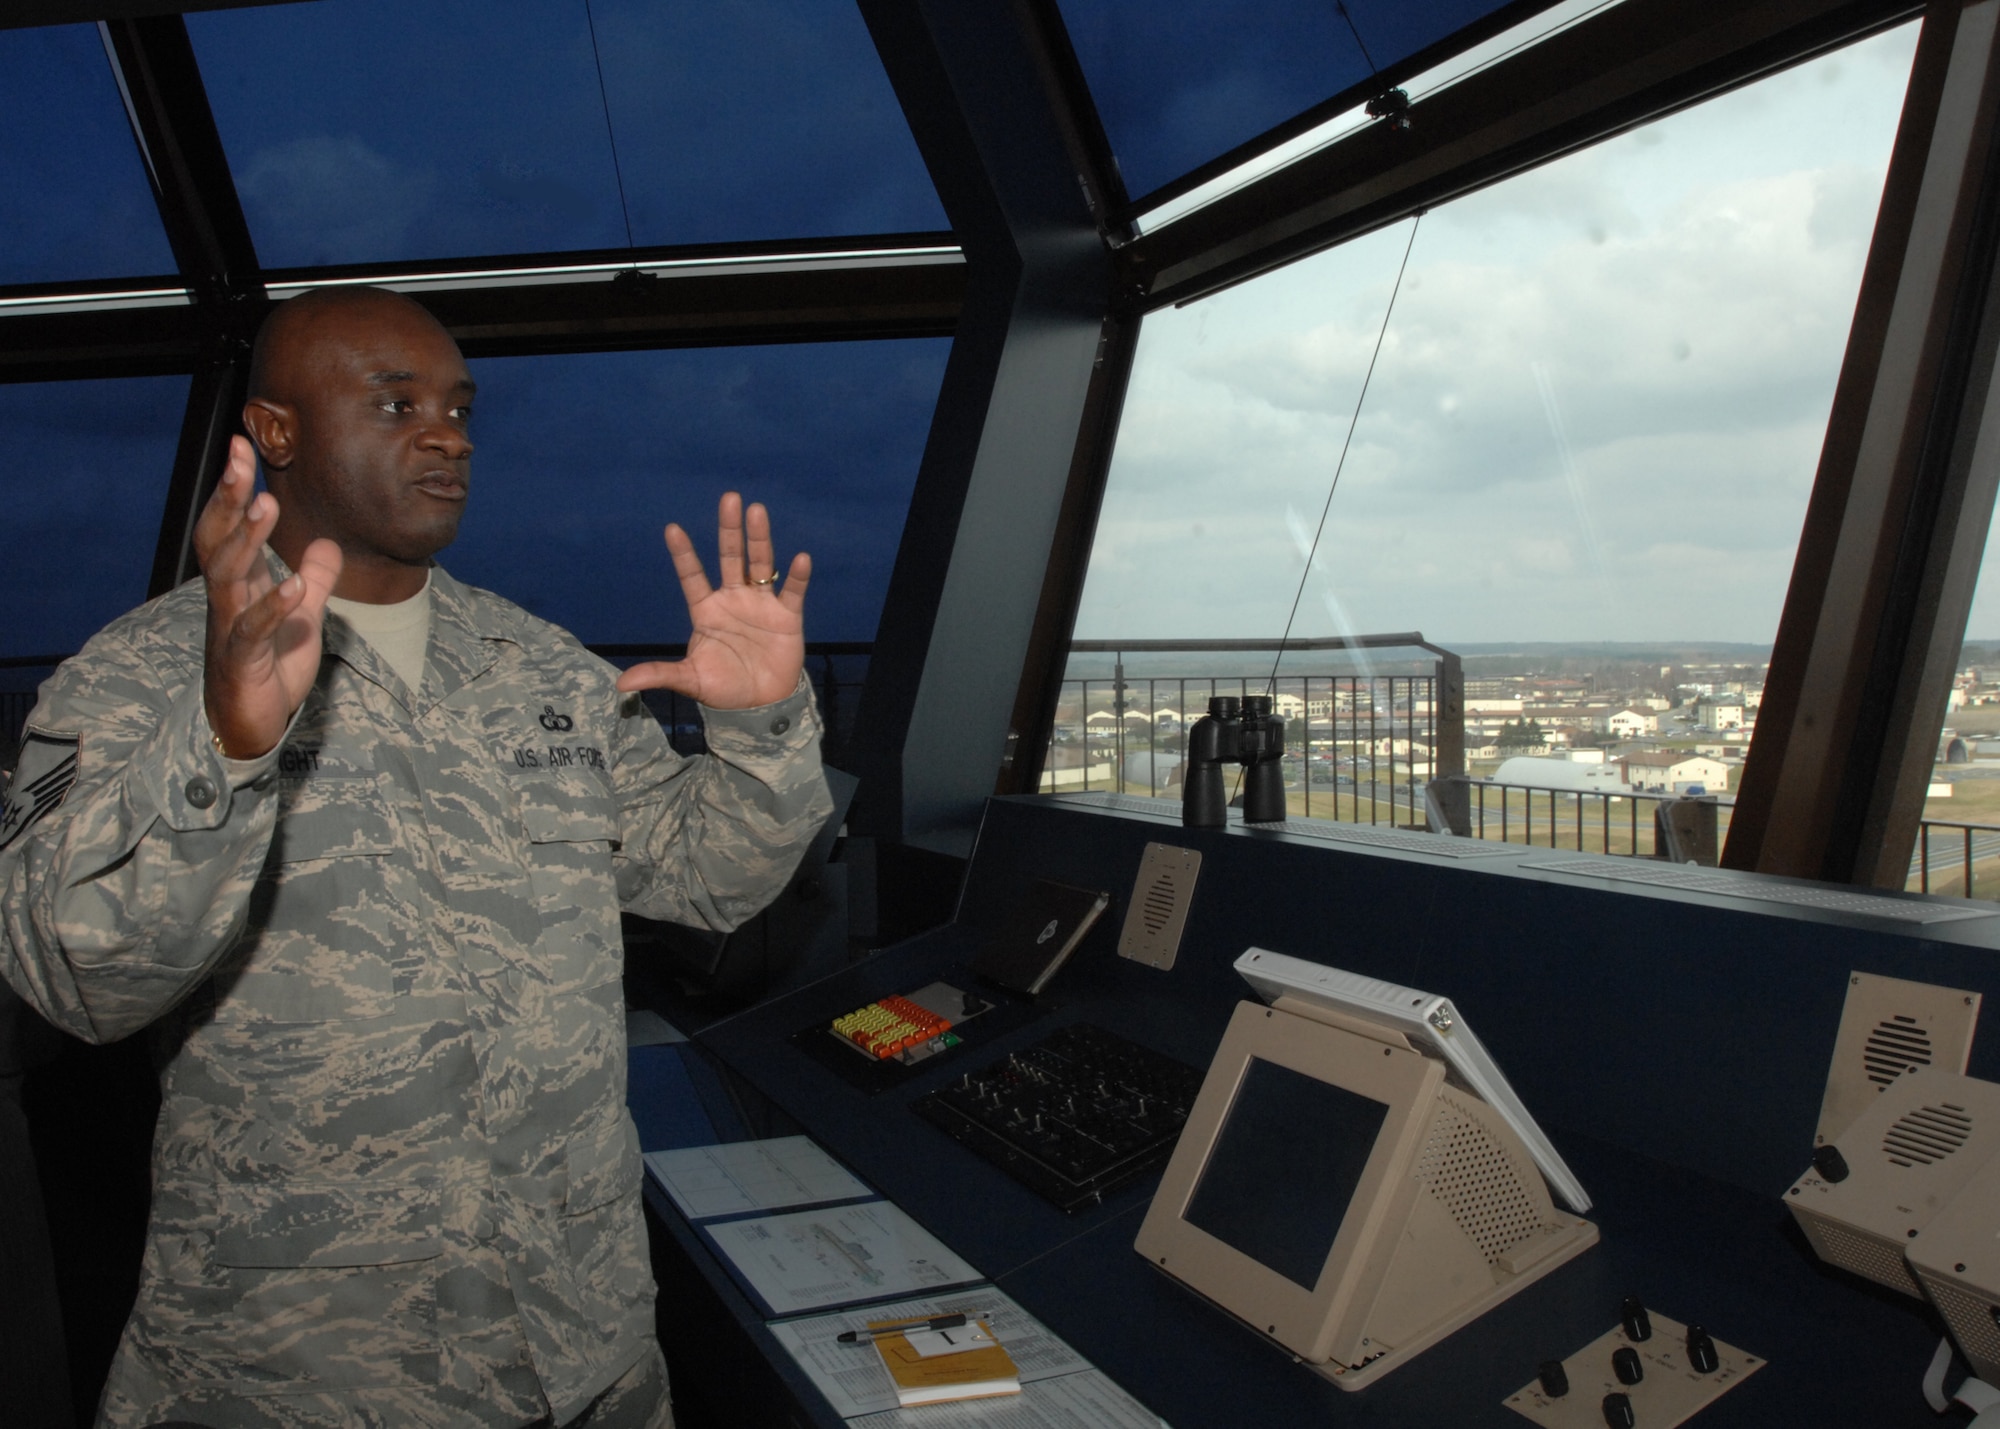 SPANGDAHLEM AIR BASE, Germany -- Master Sgt. Marcus Wright, 52nd Operations Support Squadron, gives leadership and local nationals a tour of the new Air Traffic Control Tower after the Air Traffic Control Tower ribbon cutting ceremony March 13, 2009.  The new tower gives air traffic controllers a view of the entire flight line. It houses state-of-the-art equipment and a simulator for training.  .  (U.S. Air Force photo by Senior Airman Jenifer H. Calhoun)